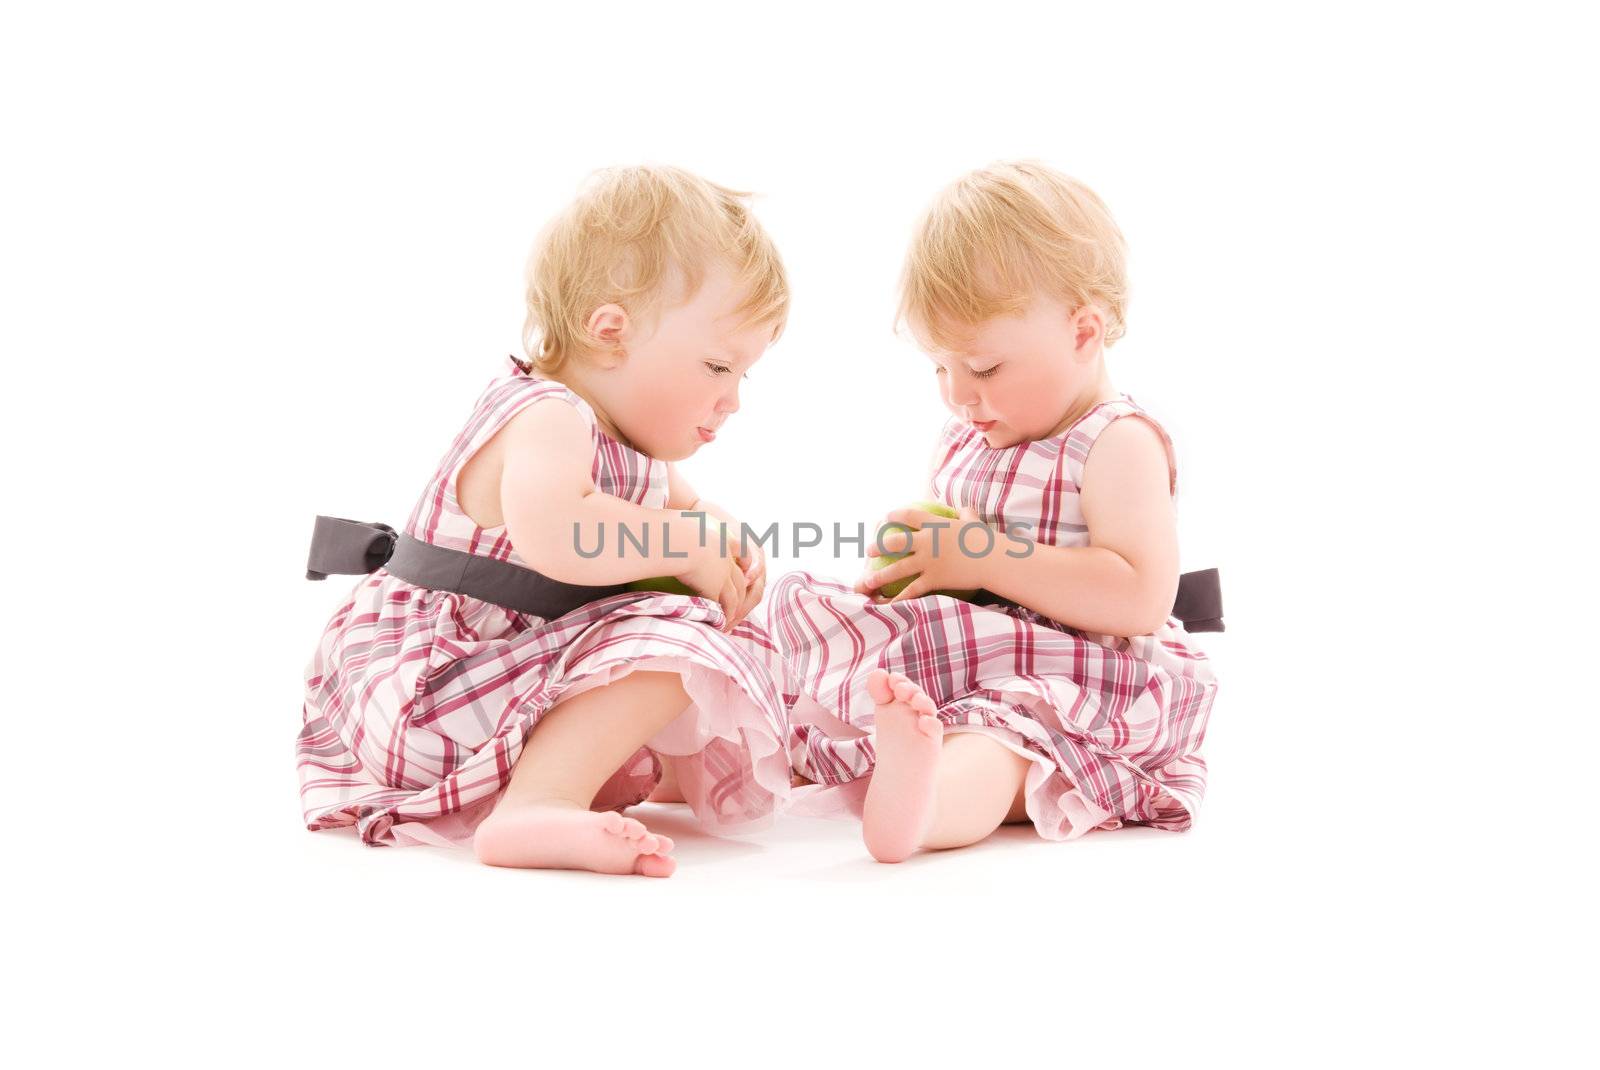 picture of two adorable twins over white